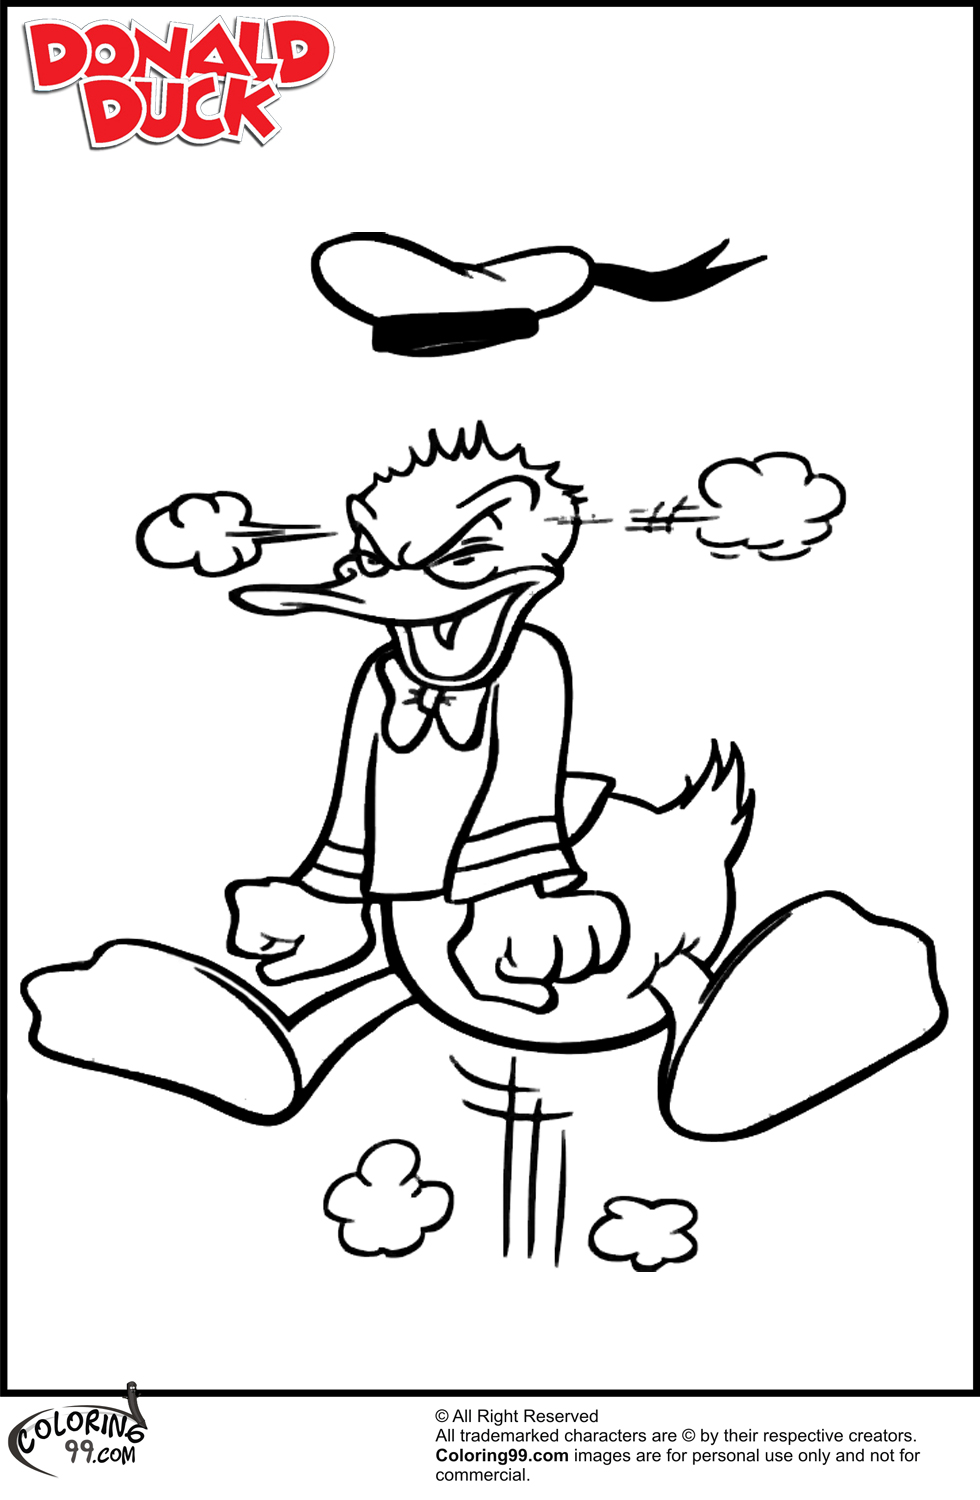 Download Coloring Pages Of Donald Duck - 292+ SVG Cut File for Cricut, Silhouette and Other Machine